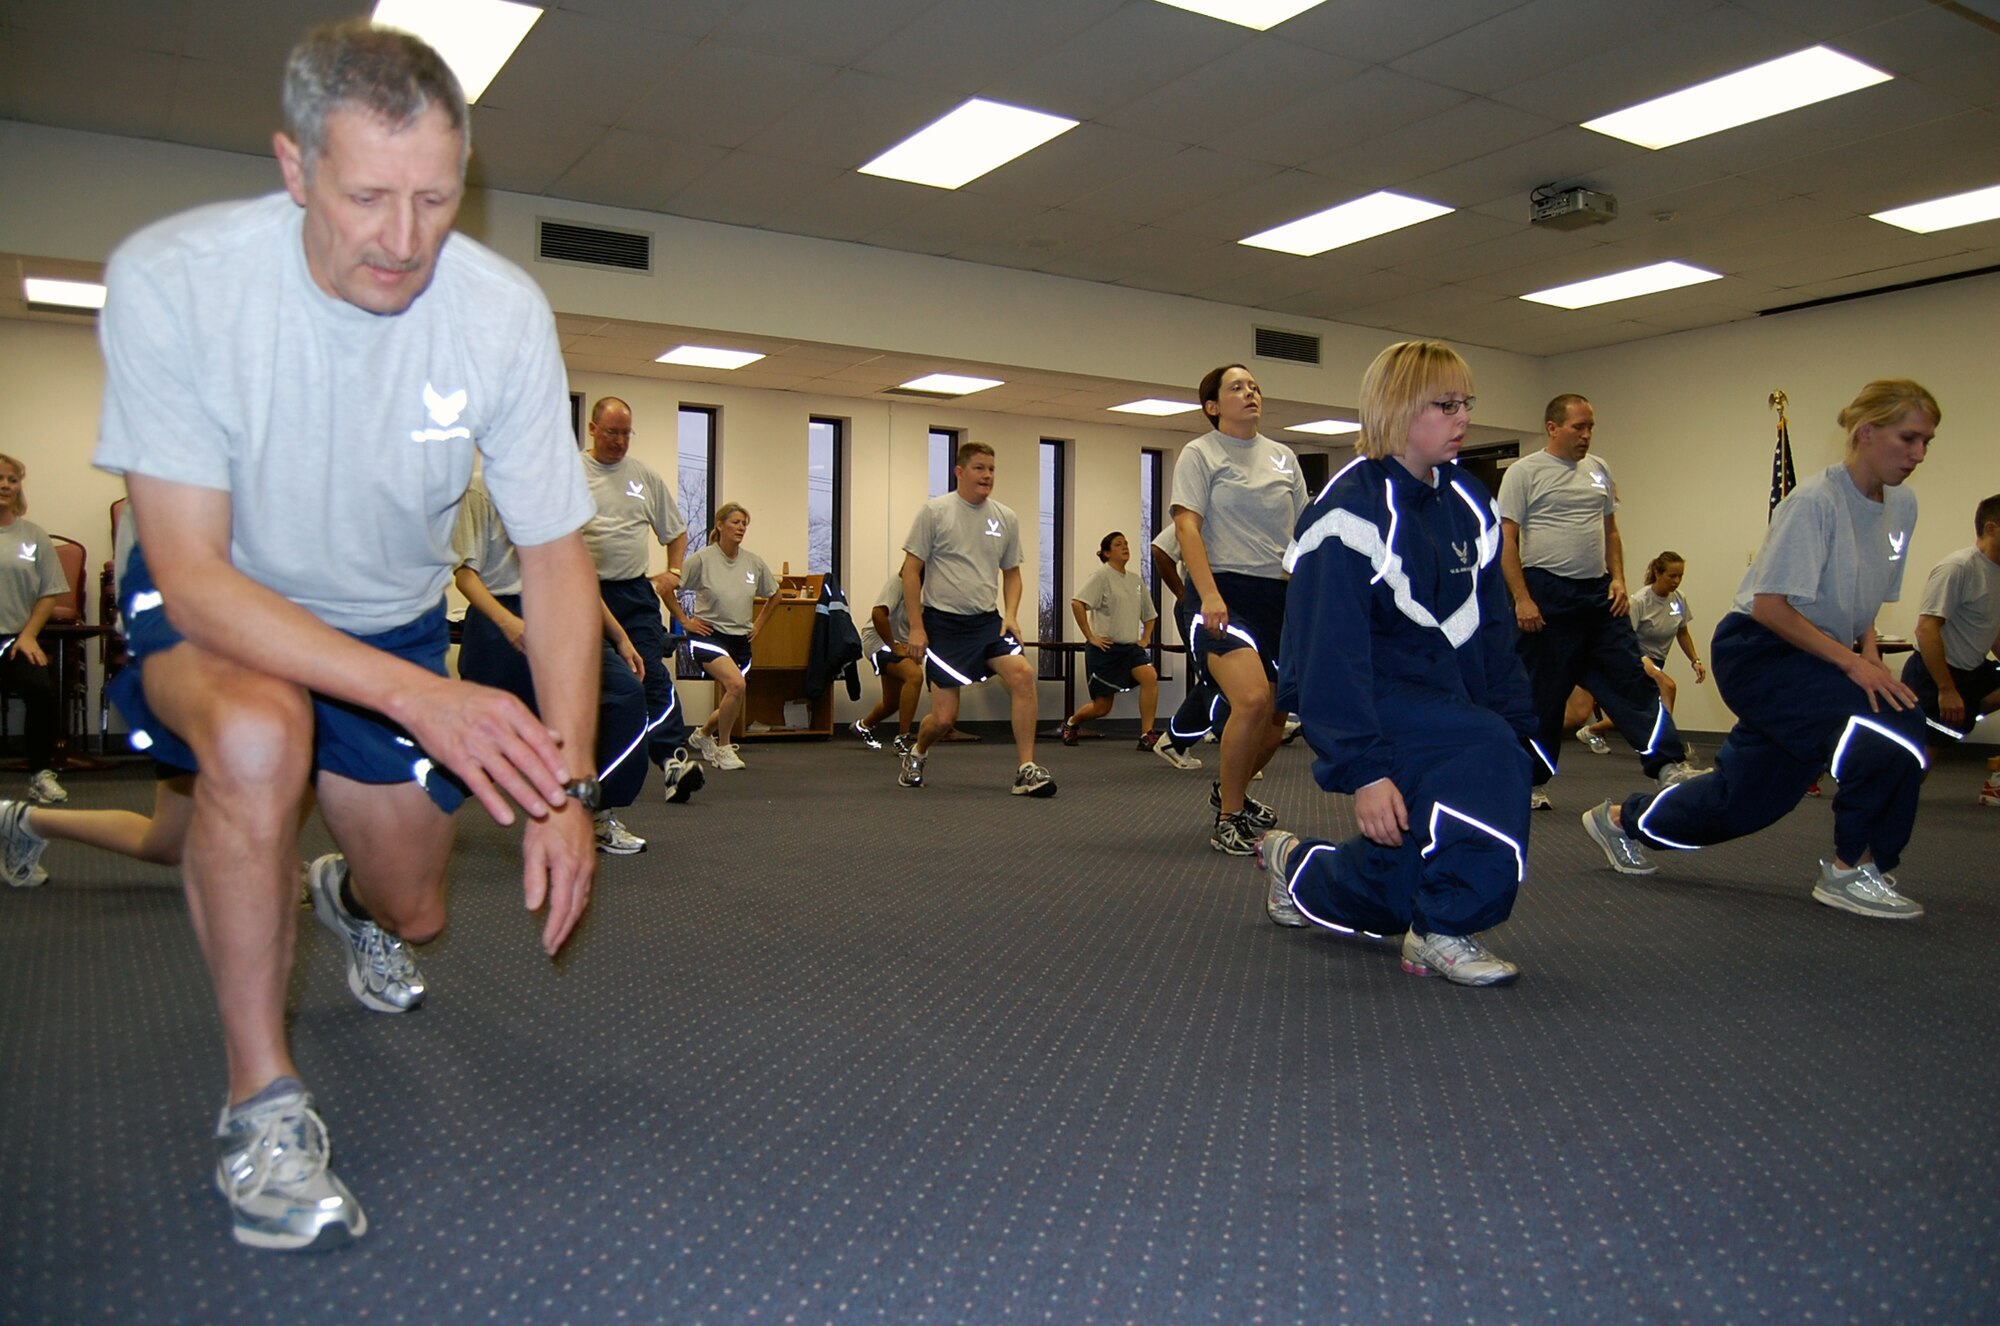 Members from the 131st Medical Group work hard doing self-paced lunges during their morning Physical Training session. With the new fitness standards coming with the new year, the Medical Group knows the importance of staying fit even during the winter months. (Photo by Senior Airman Jessica Donnelly)